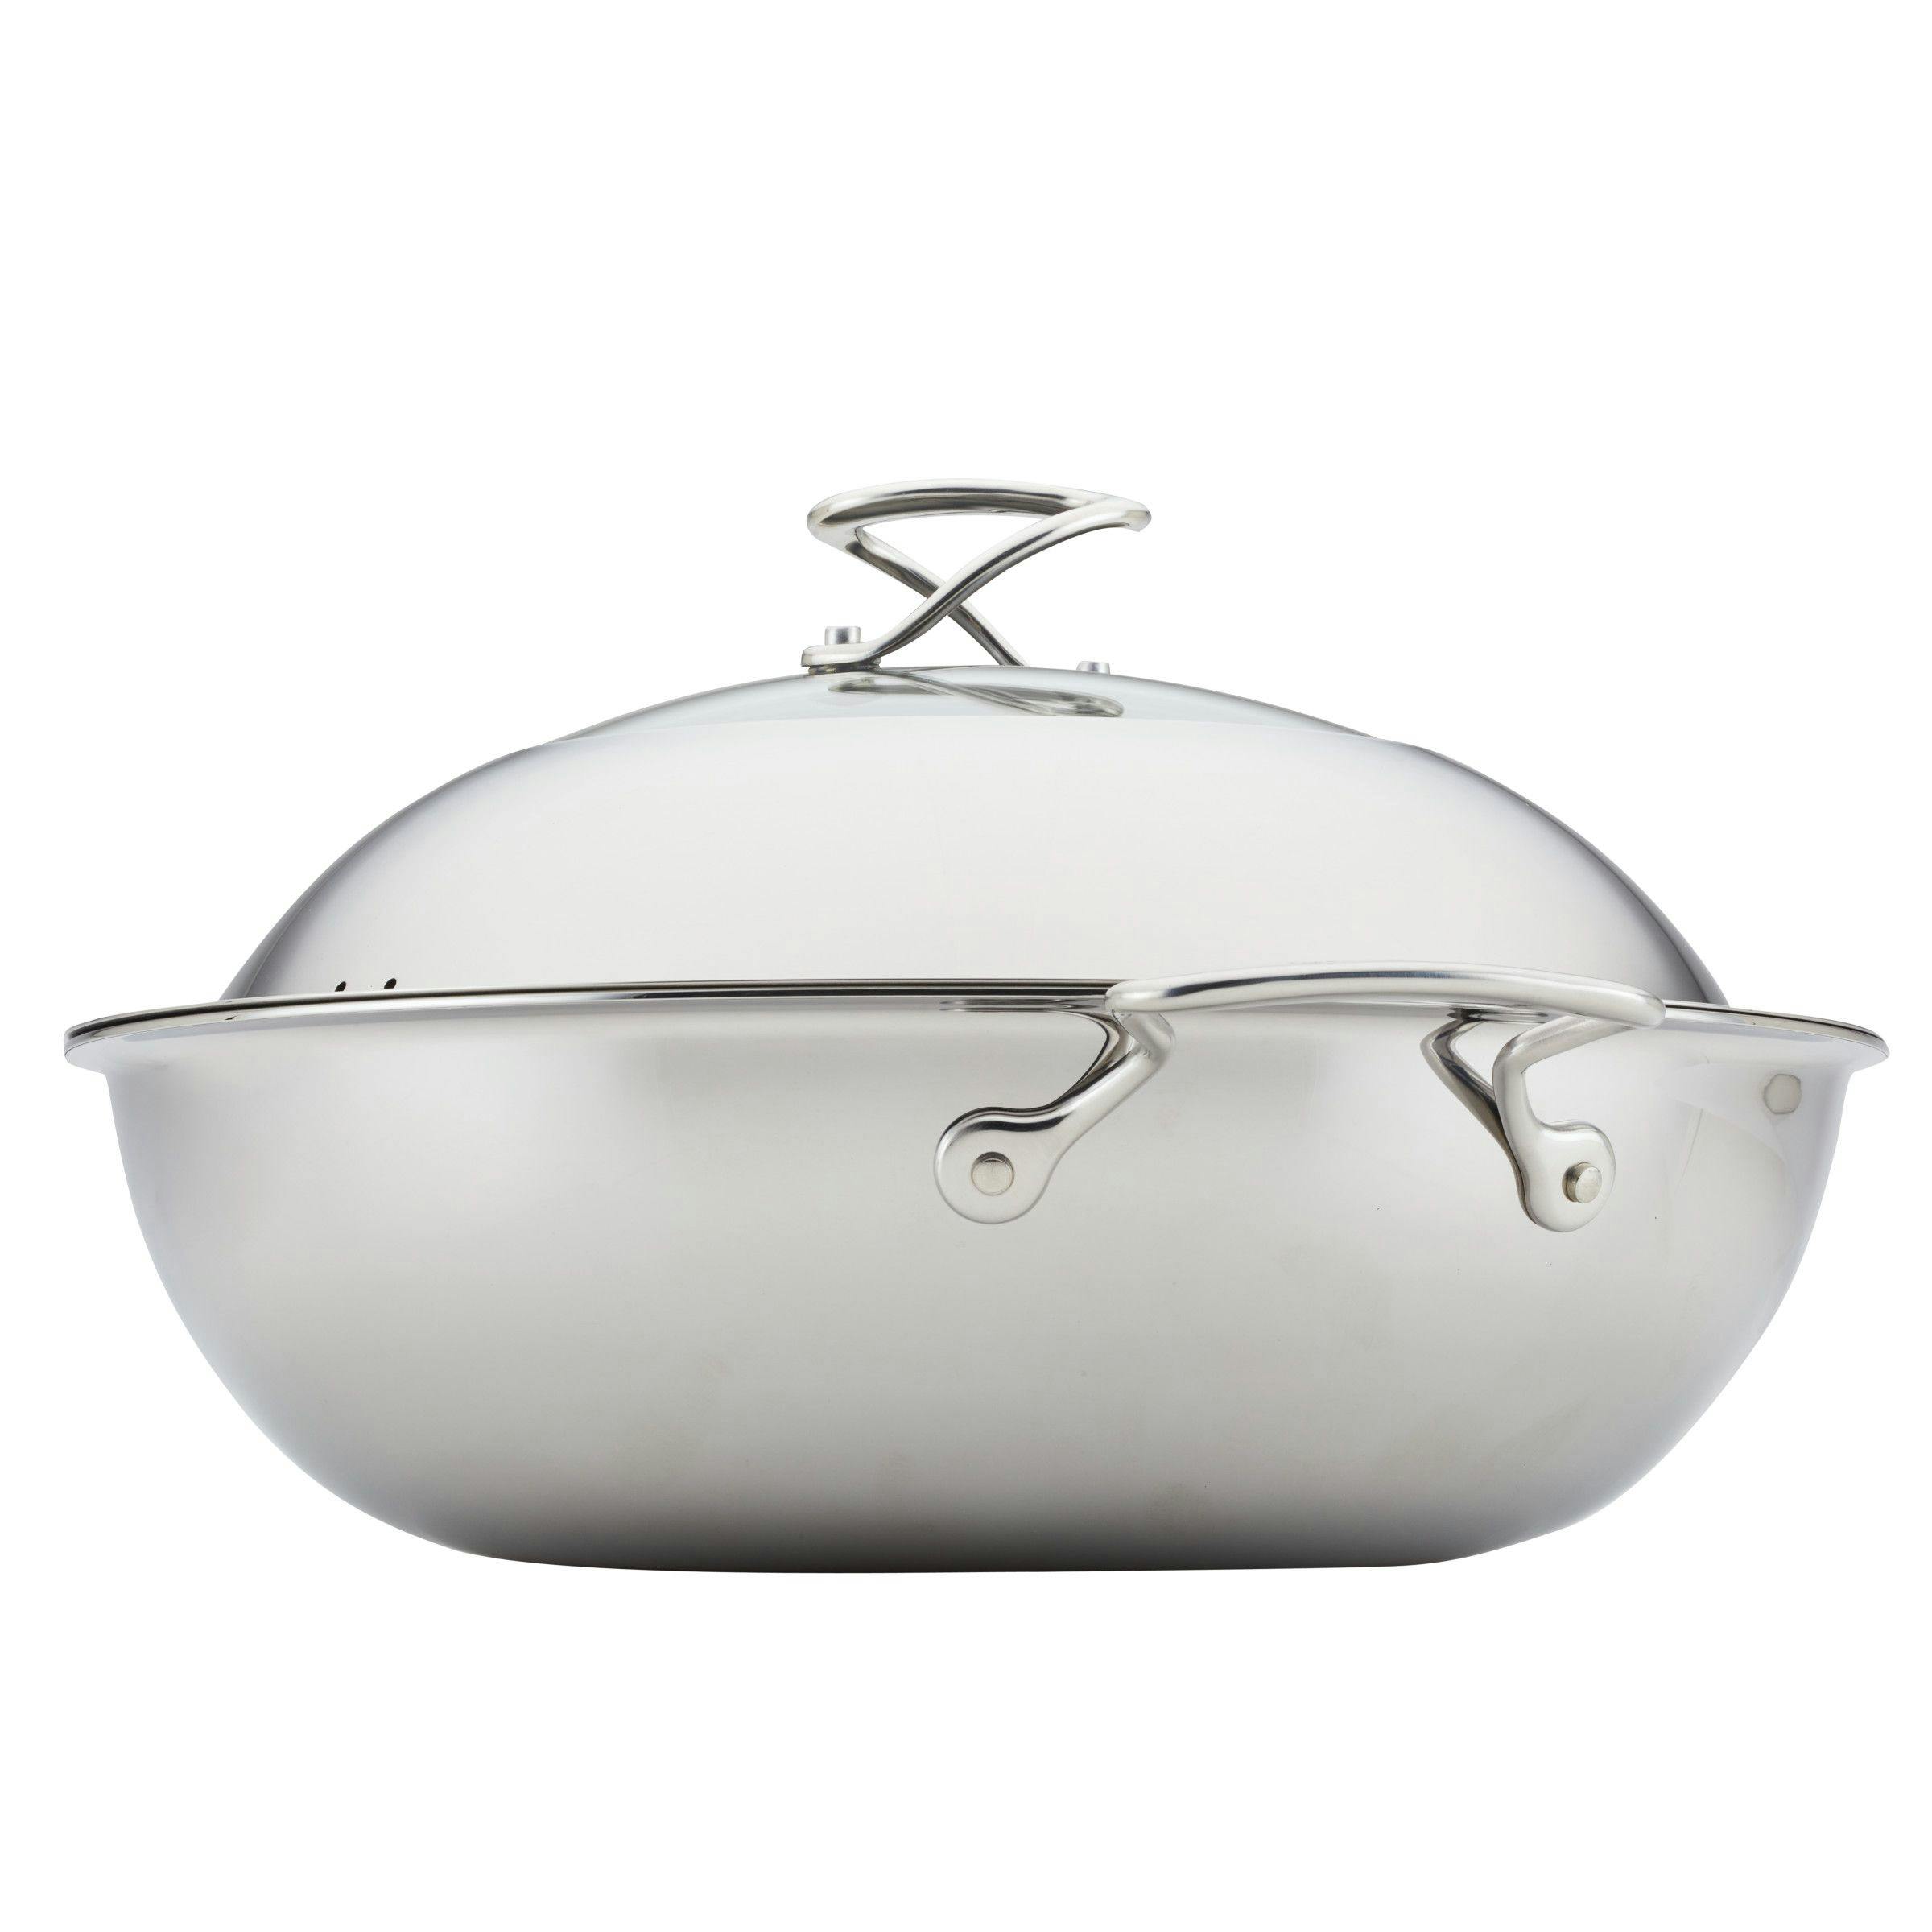 Circulon Clad Stainless Steel Induction Wok with Glass Lid and